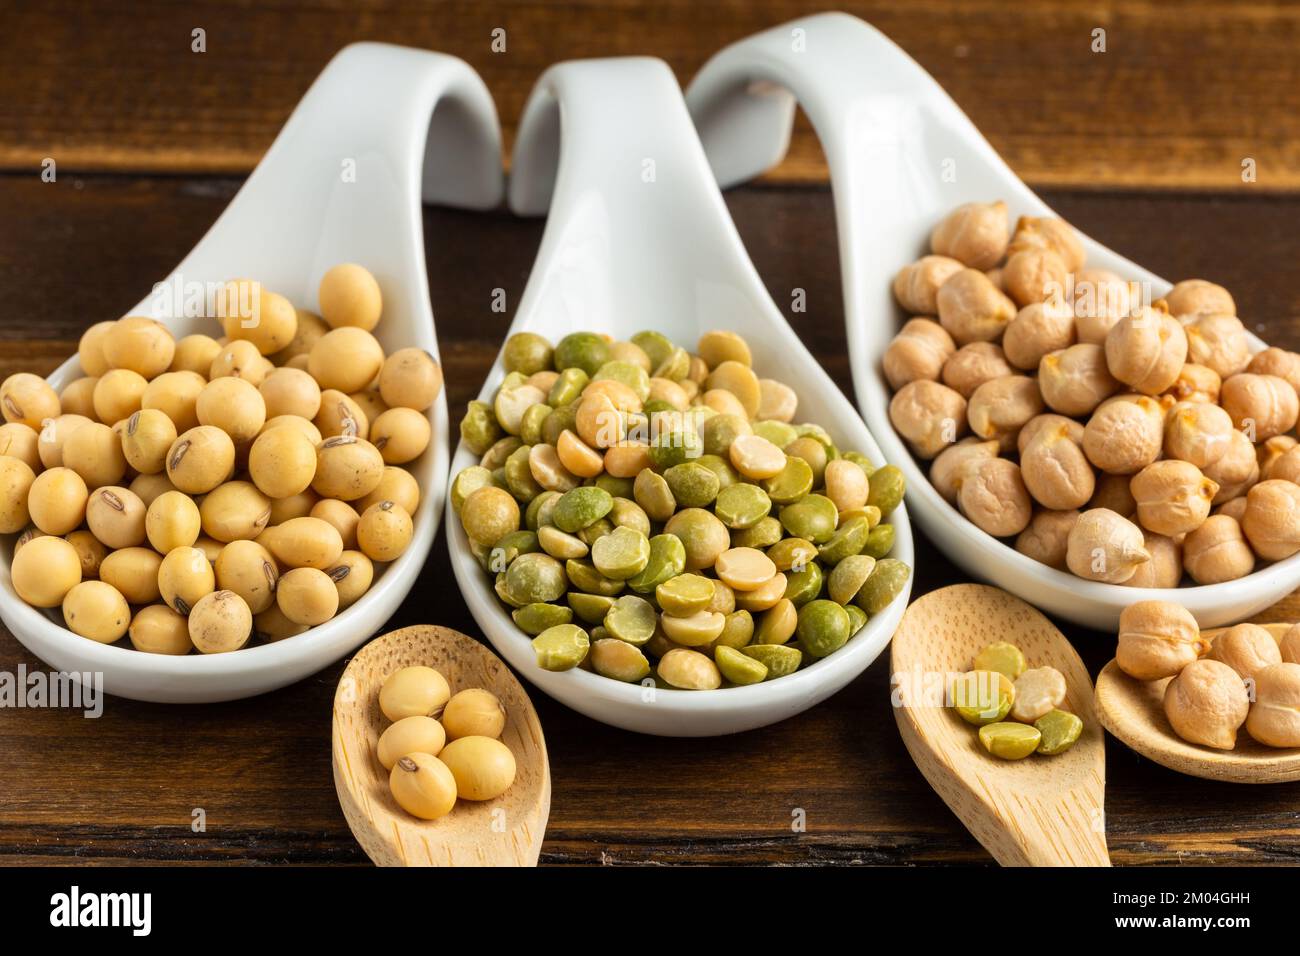 close-up view of  beans mix background, bulk soybean seeds,  dry peas and Dried chickpeas Stock Photo